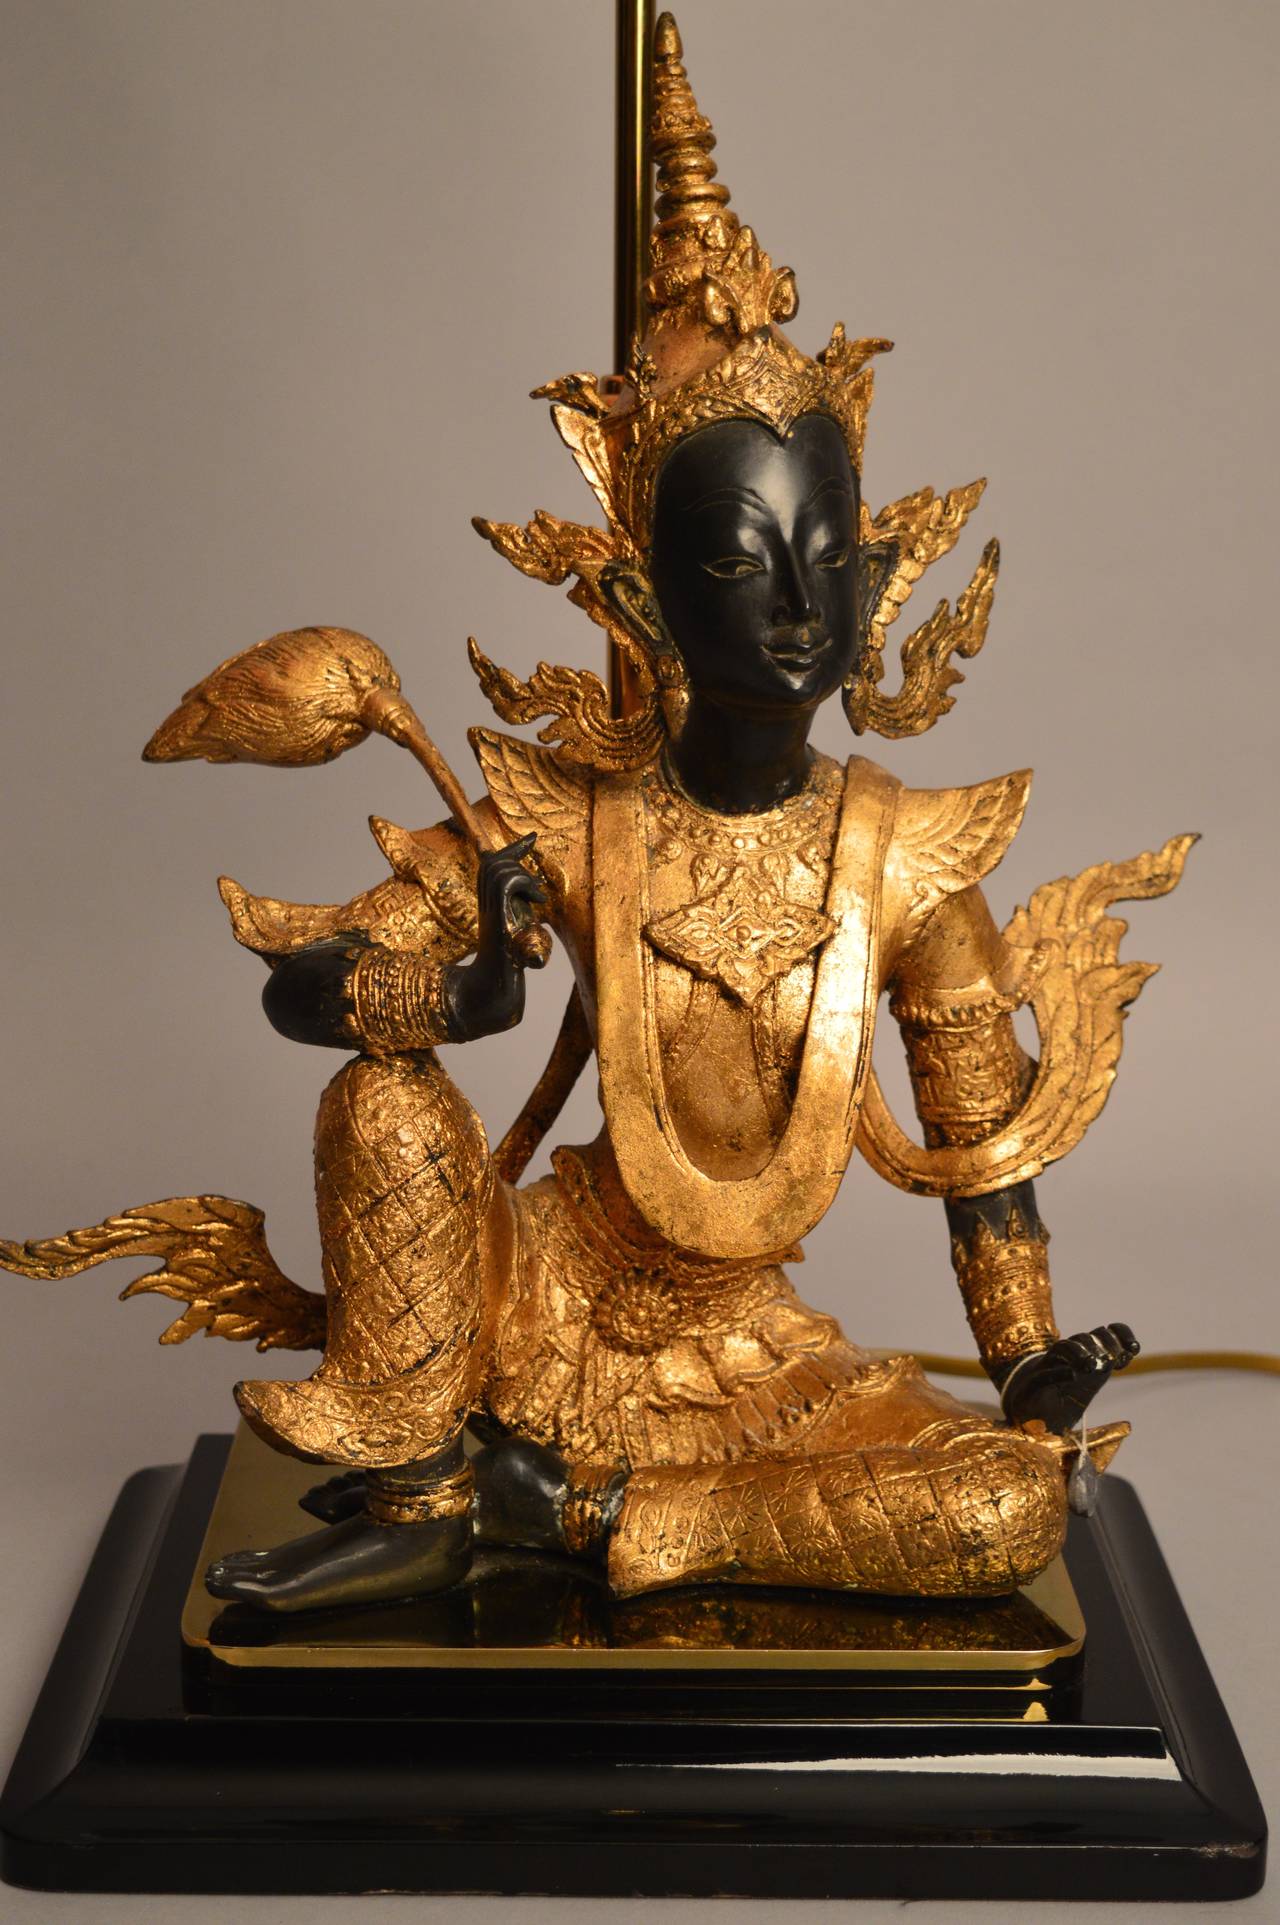 A very fine 20th century bronze statue with hand applied gold leaf of the ancient Cambodian dancing goddess Apsara. The bronze has been mounted on a statue base lamp Stand in the 1960s where it was used in the Parisian apartment of a set